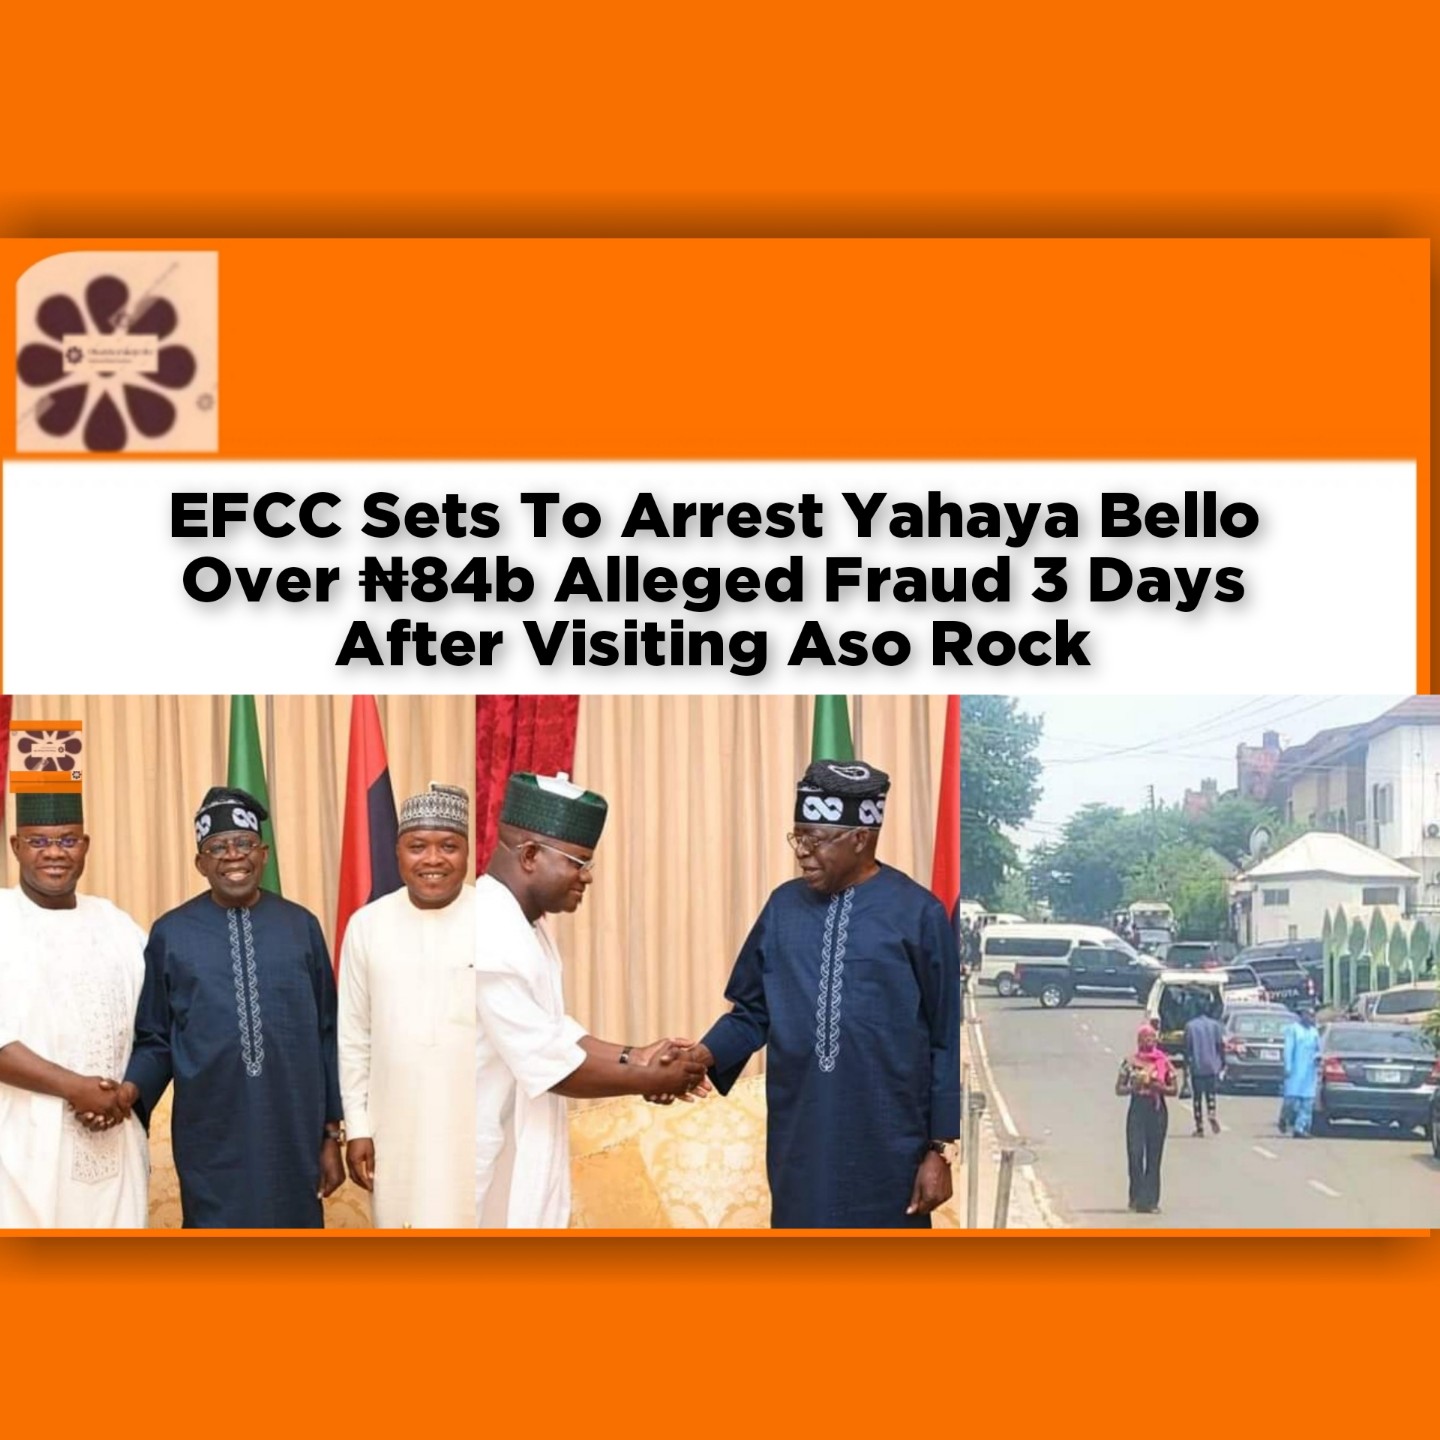 EFCC Sets To Arrest Yahaya Bello Over ₦84b Alleged Fraud 3 Days After Visiting Aso Rock ~ OsazuwaAkonedo #military